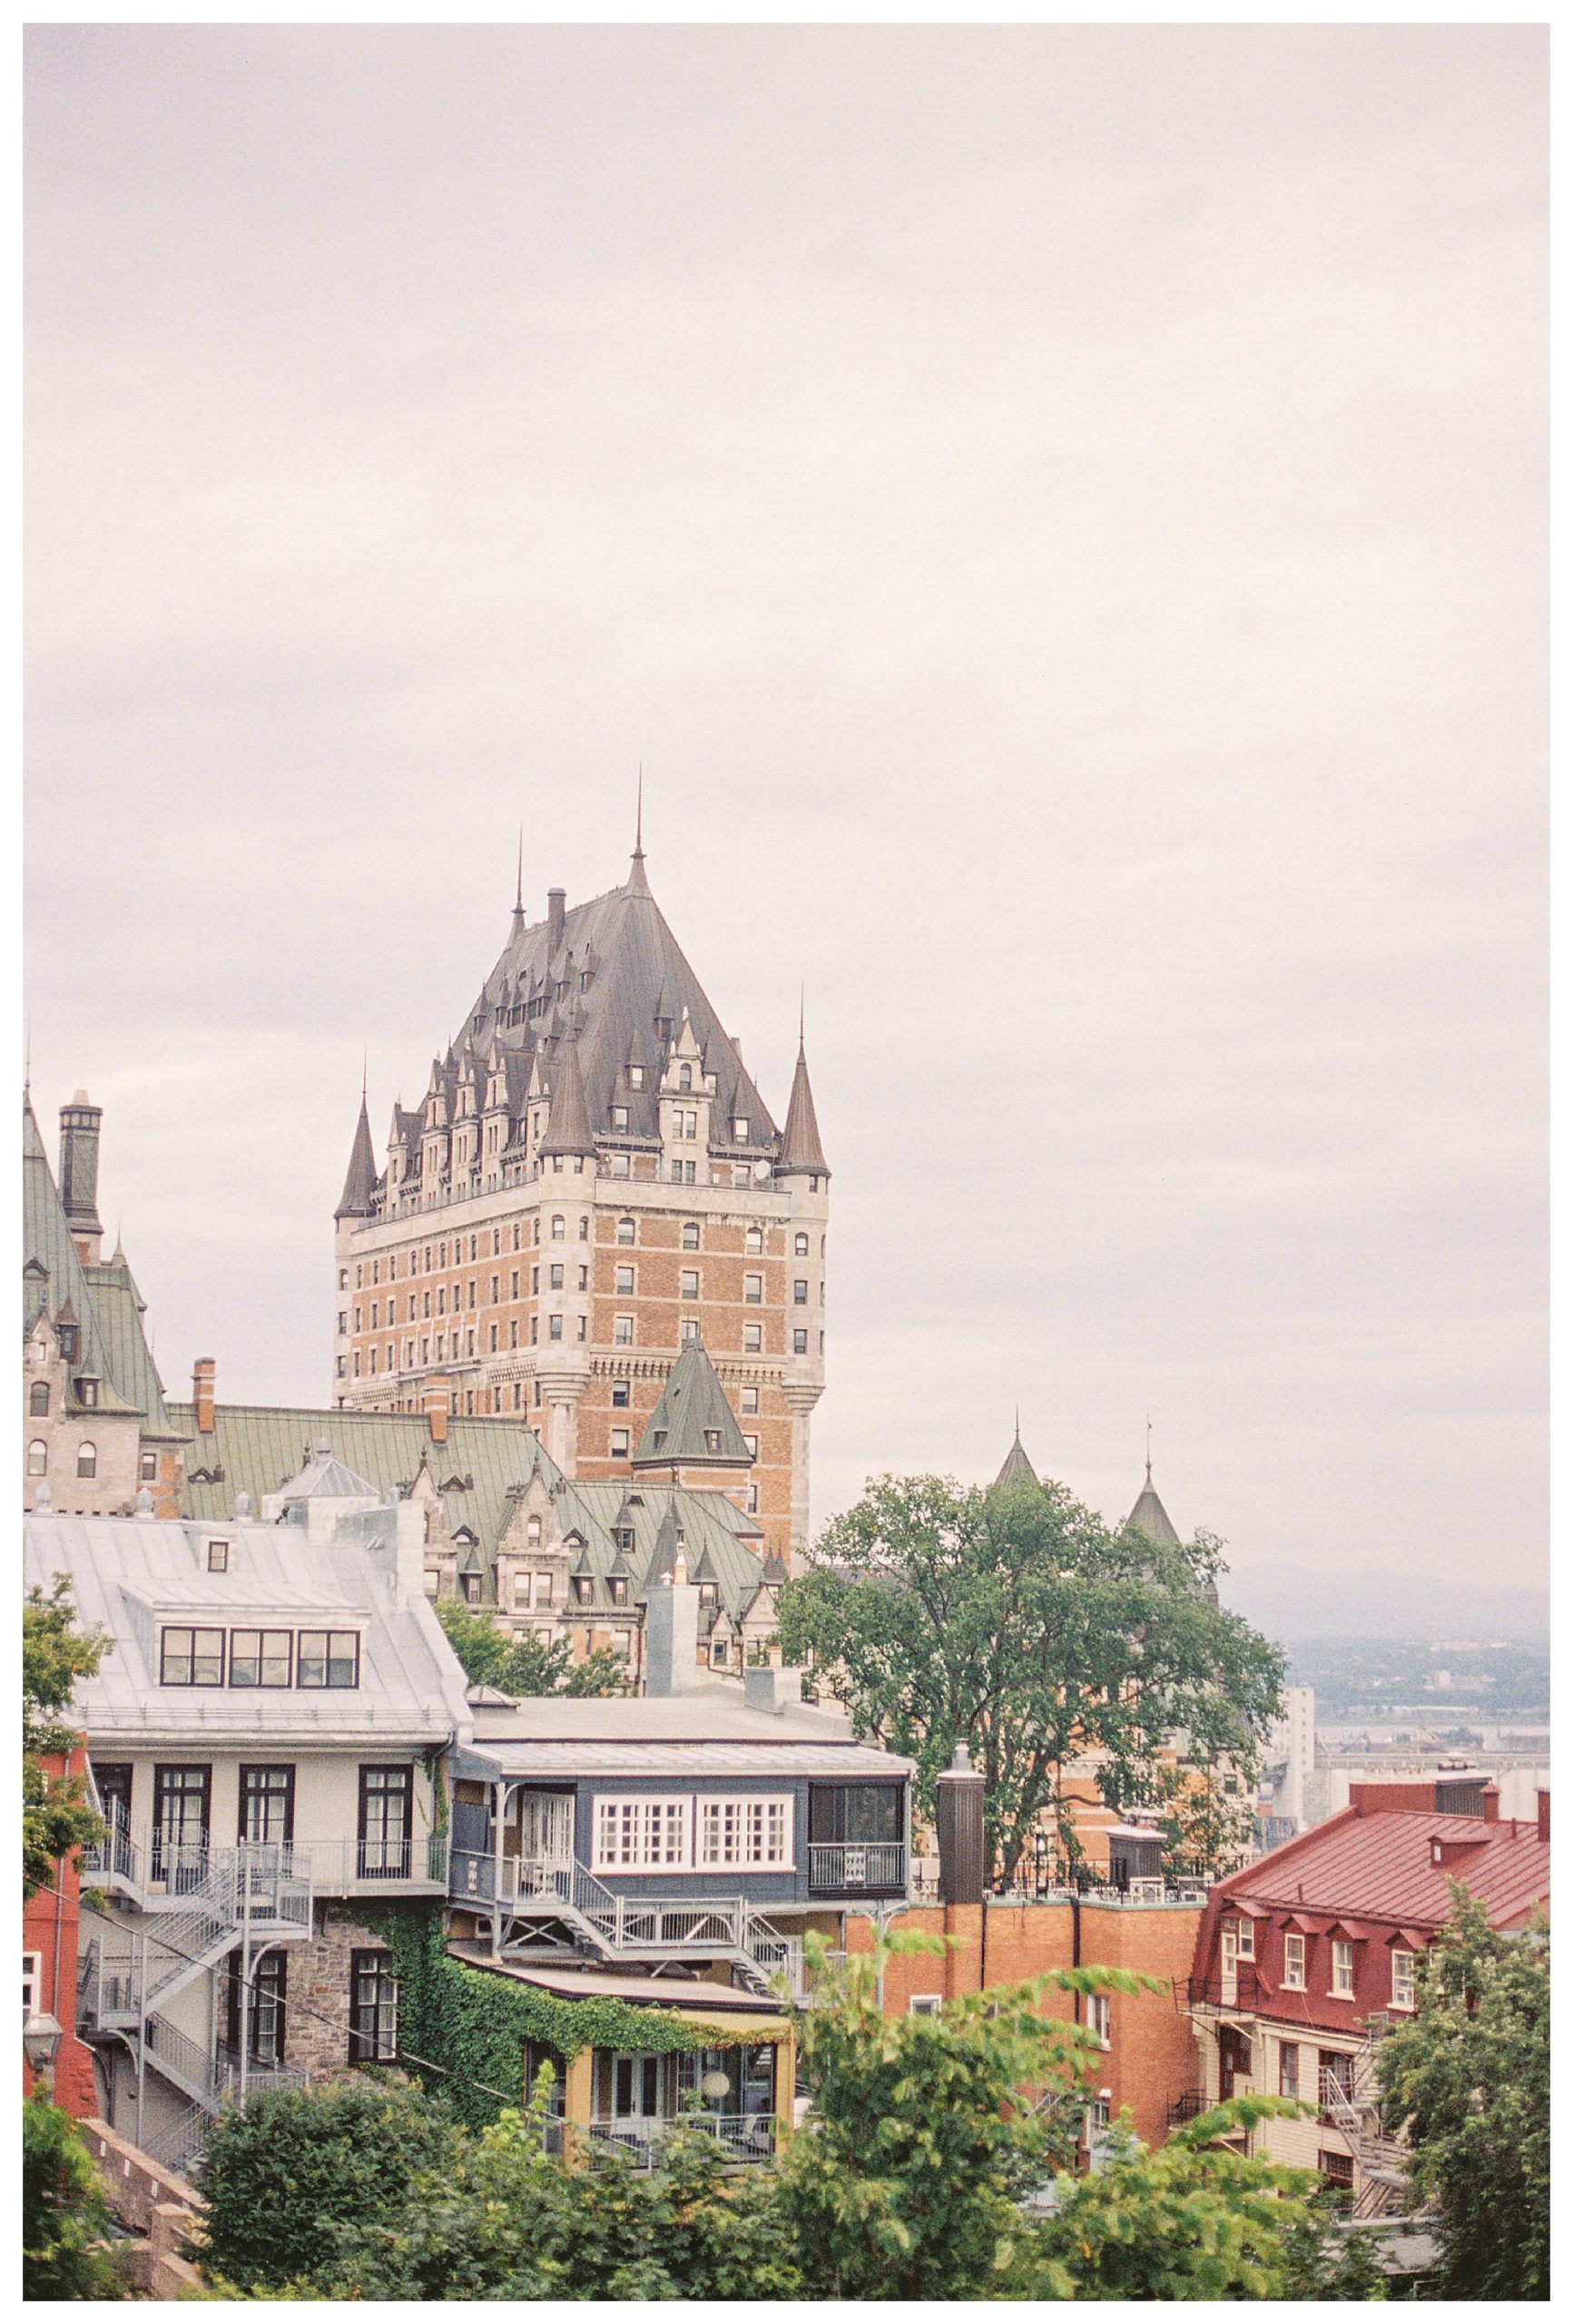 View of Fairmont Chateau in Quebec City.